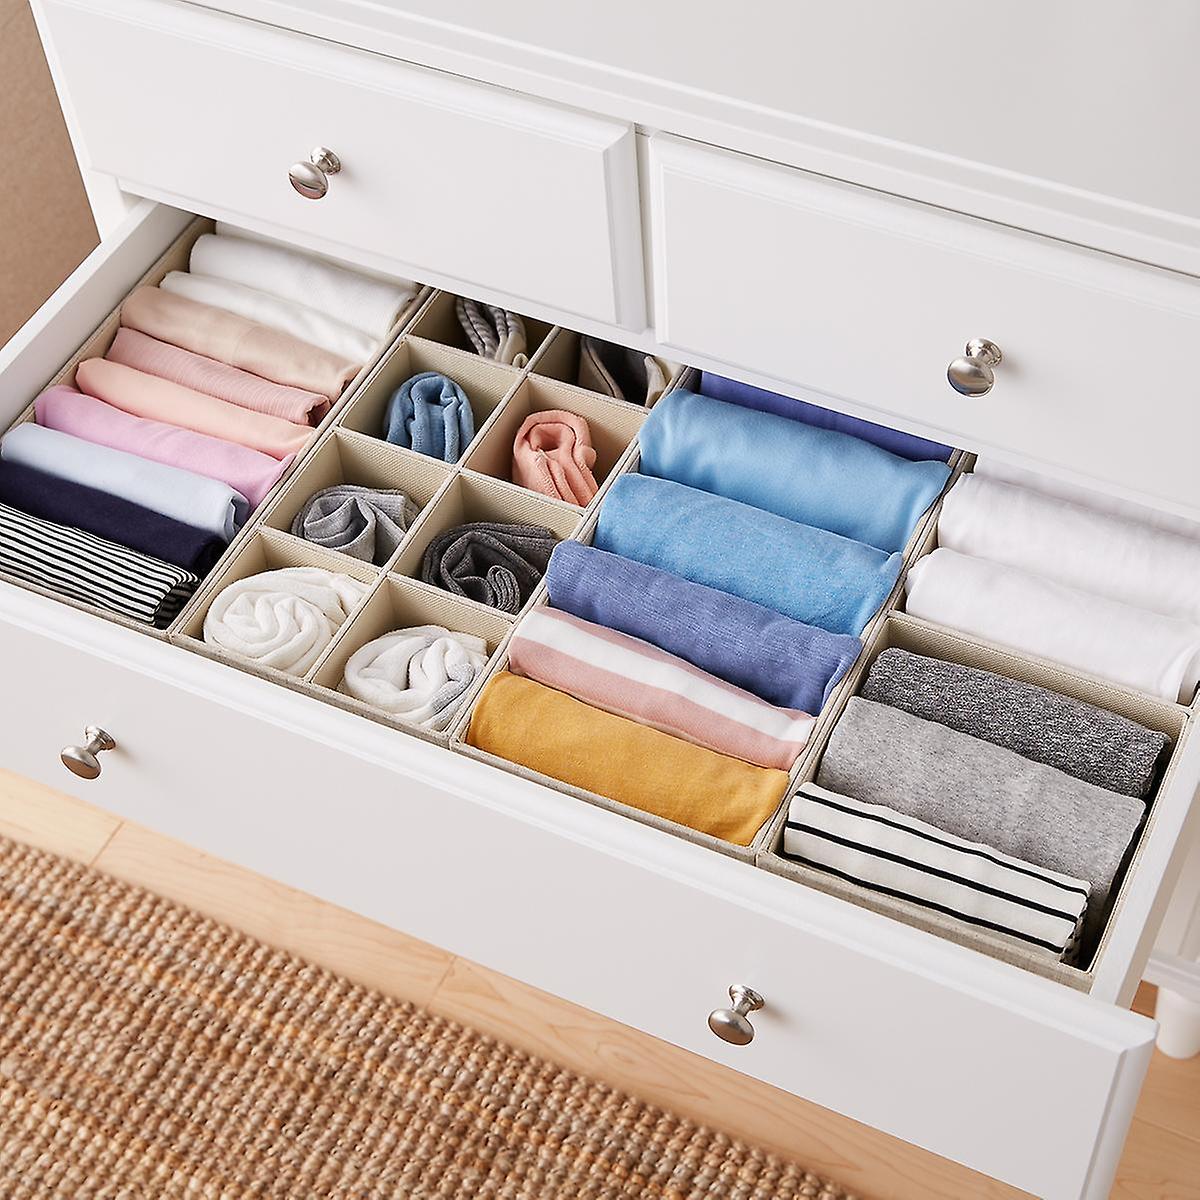 Neatly folded clothes in drawers... attention to detail 